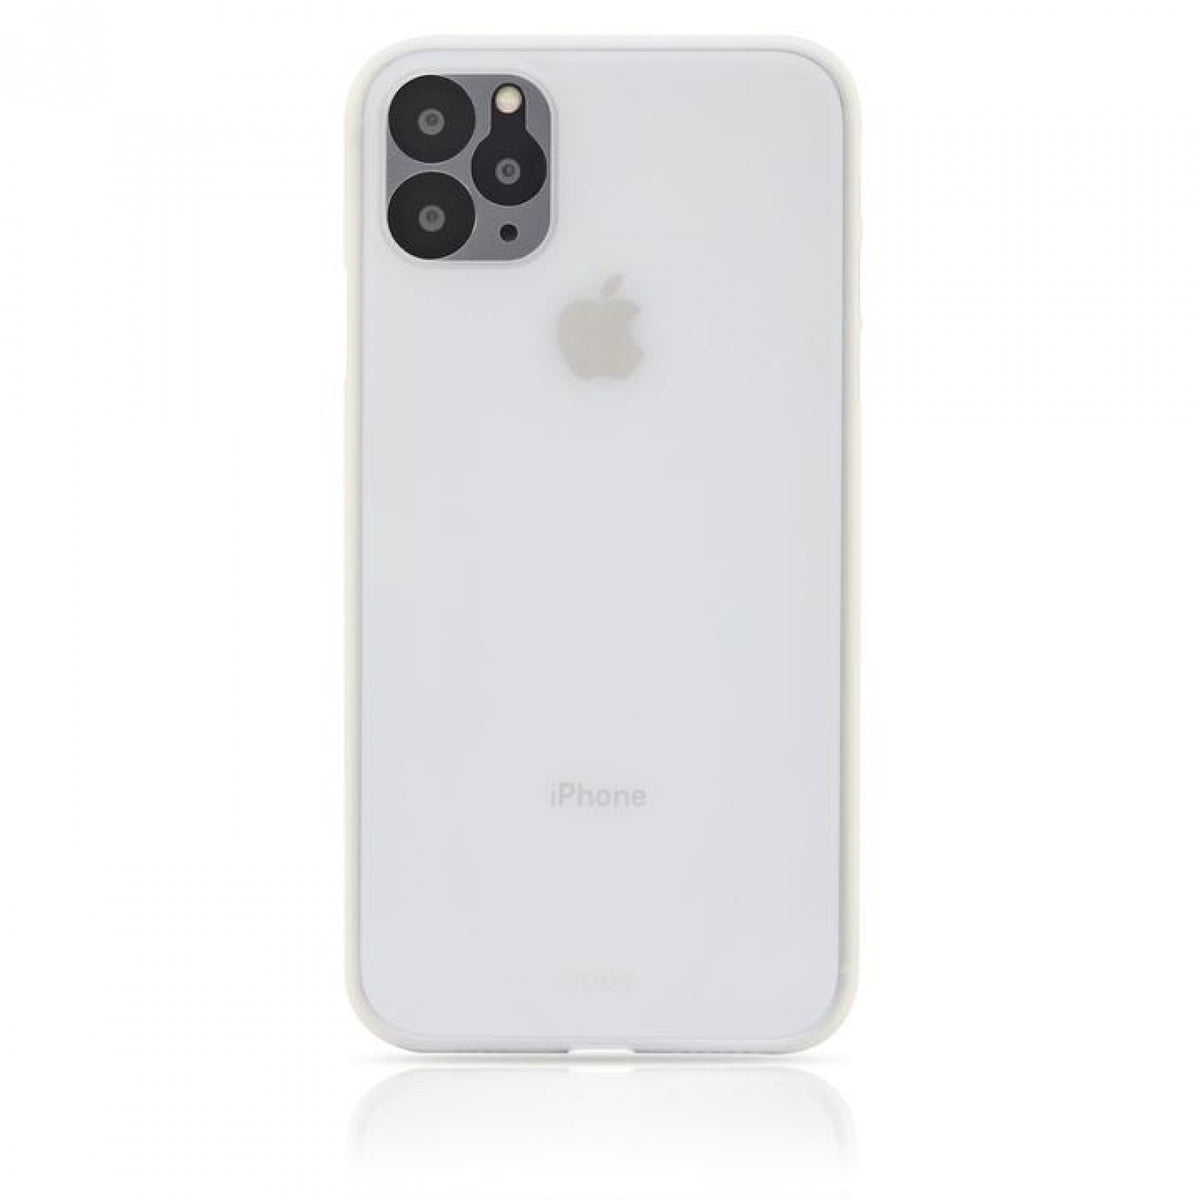 QDOS Mask Case for iPhone 11 Pro Max - Mist - iStore Namibia